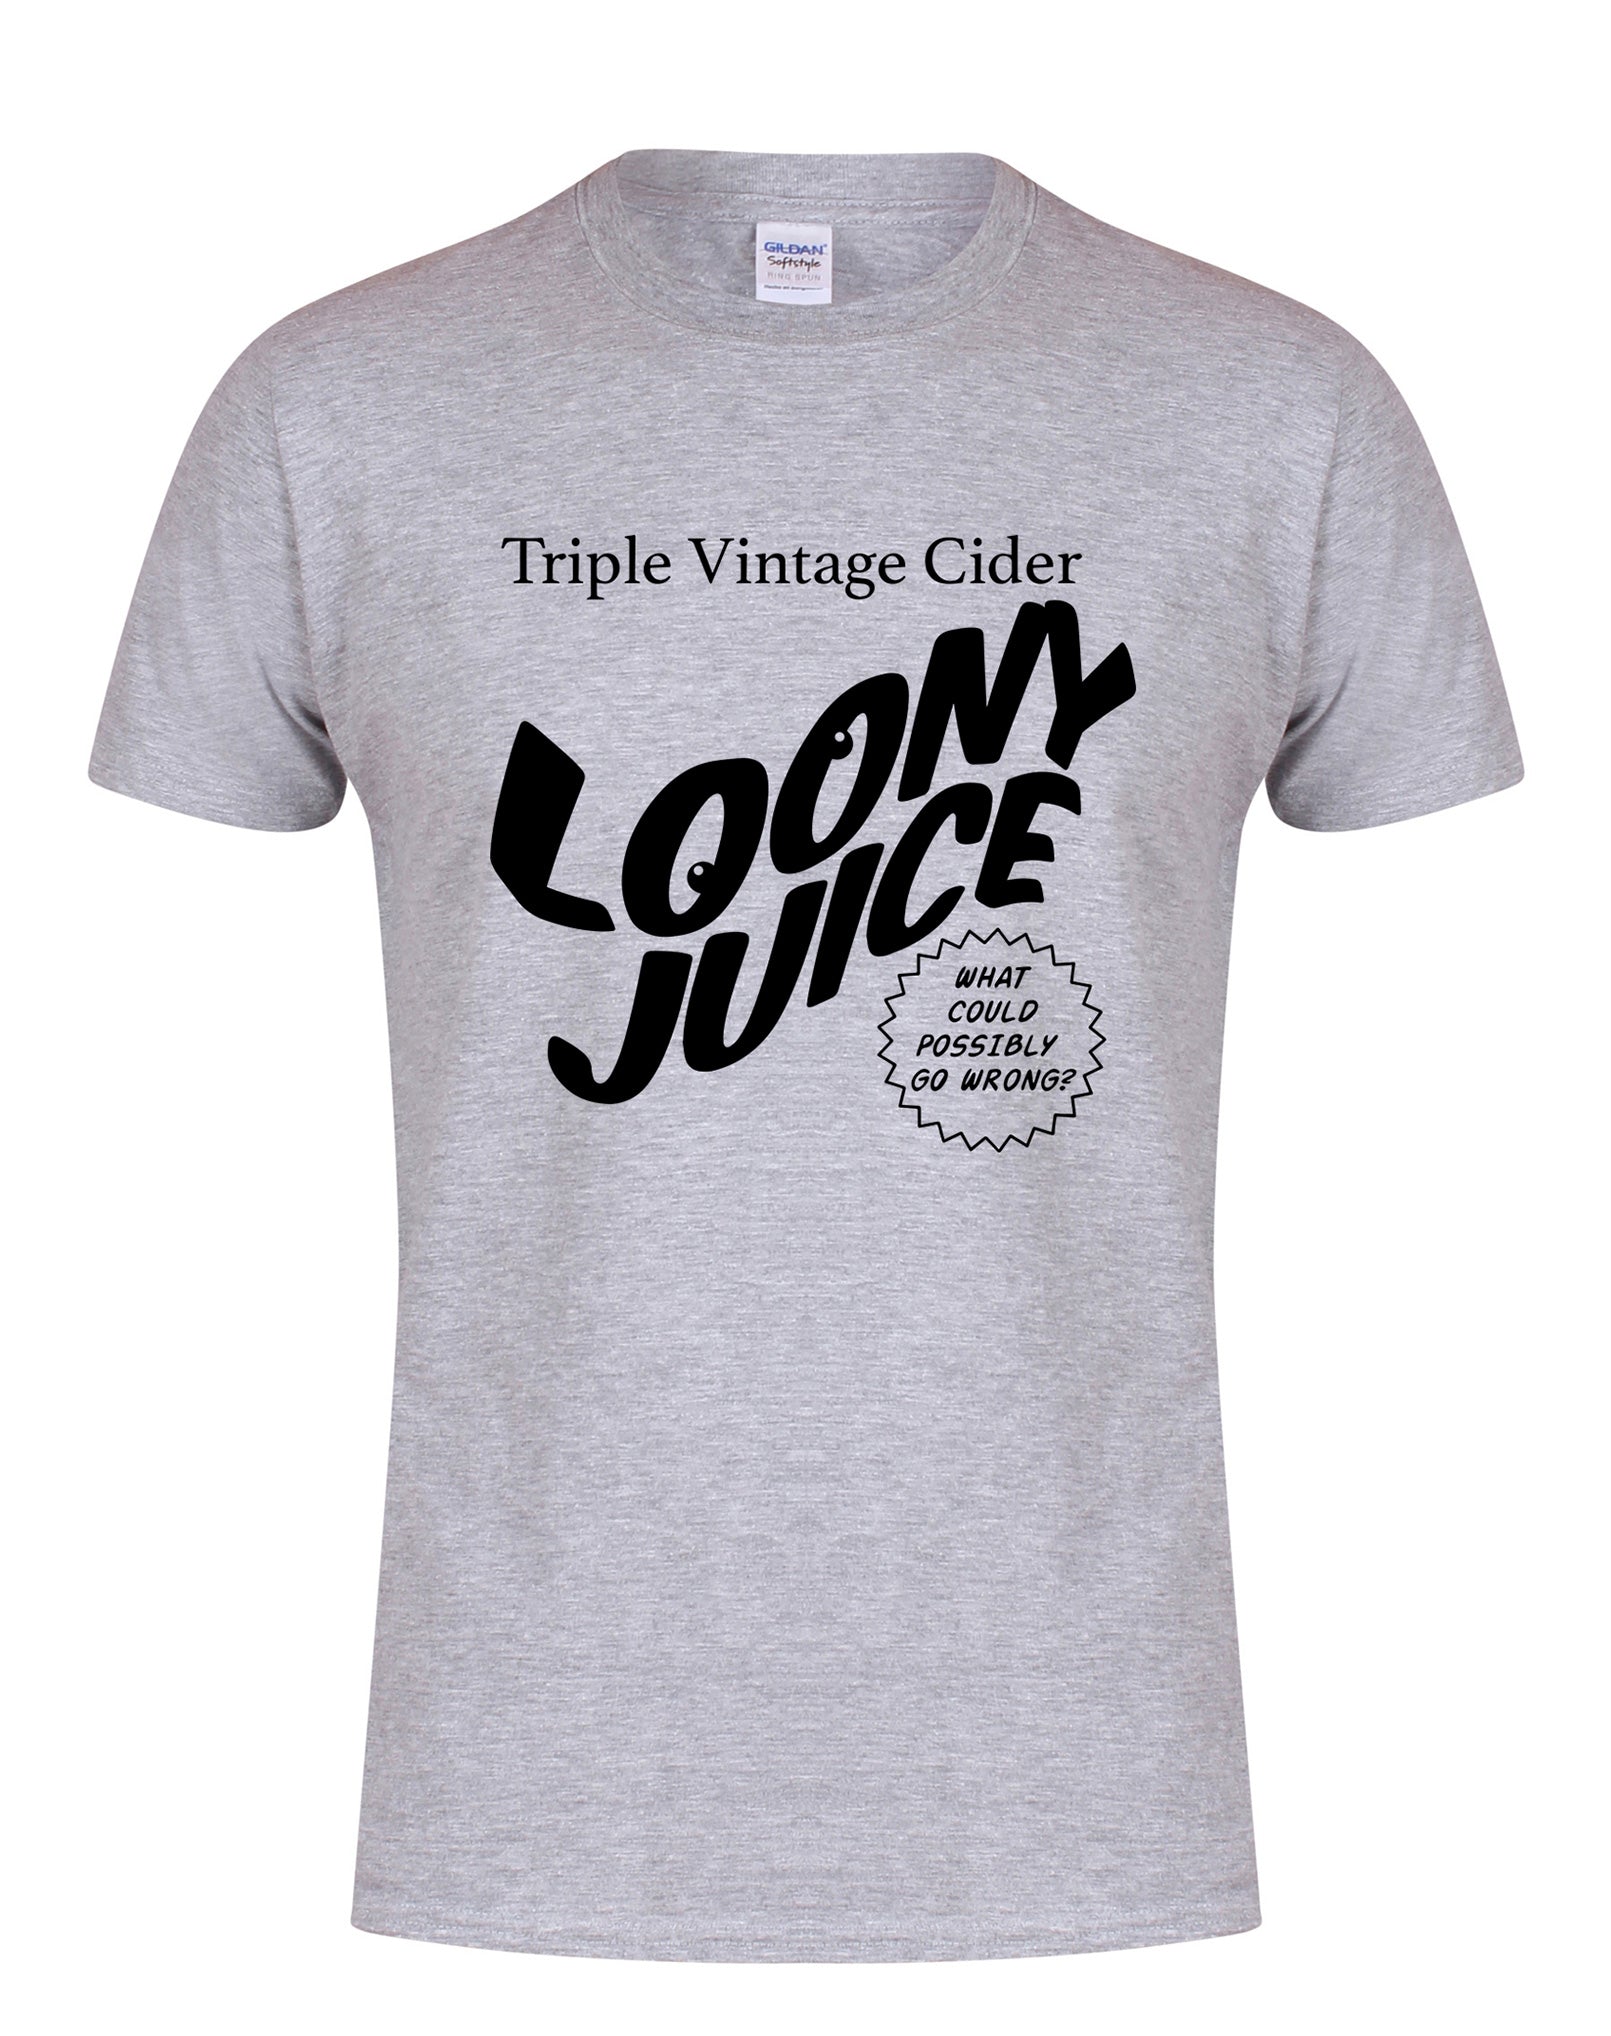 Loony Juice unisex fit T-shirt - various colours - Dirty Stop Outs